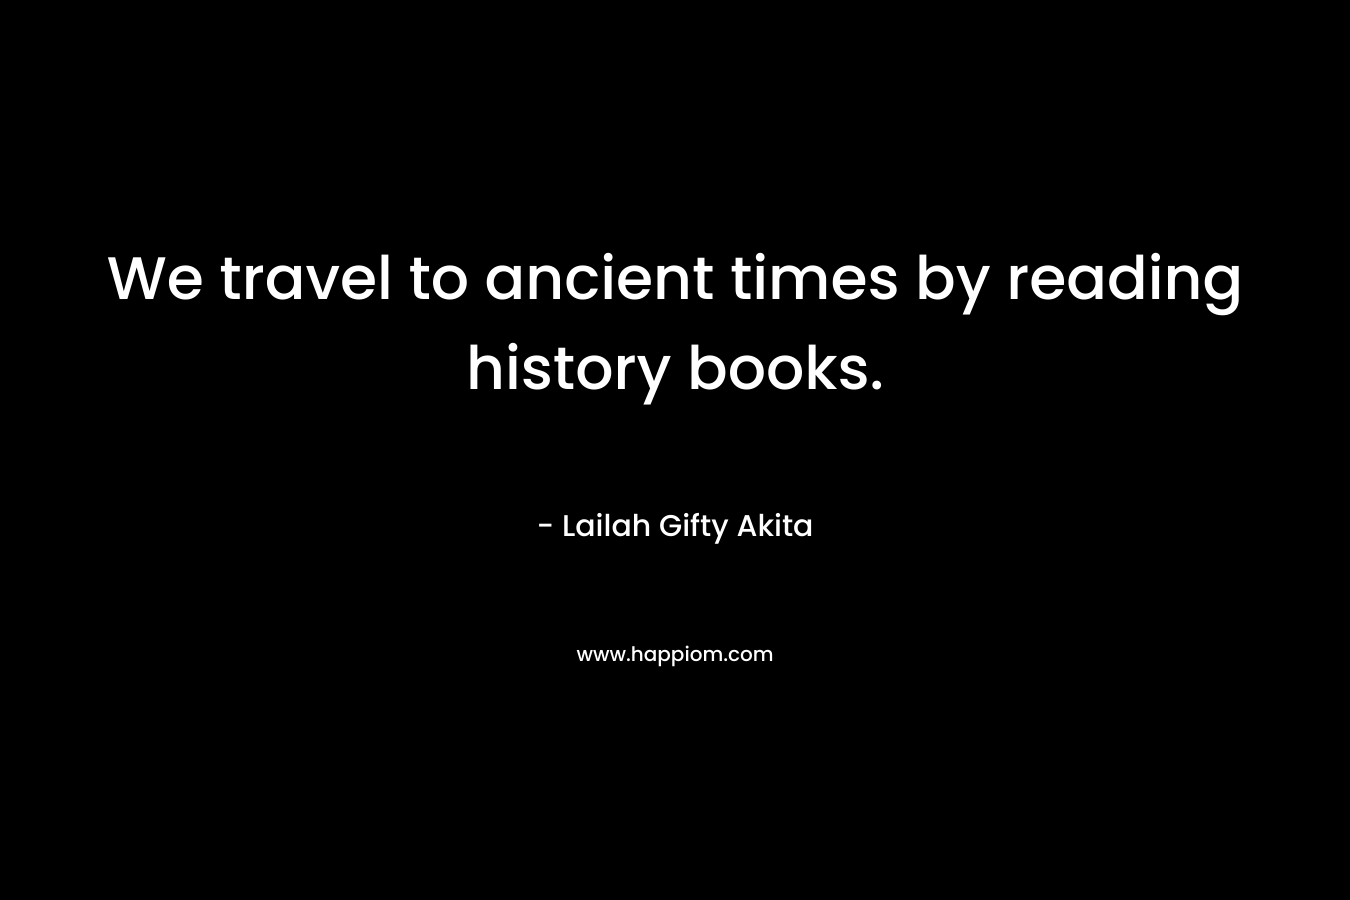 We travel to ancient times by reading history books.